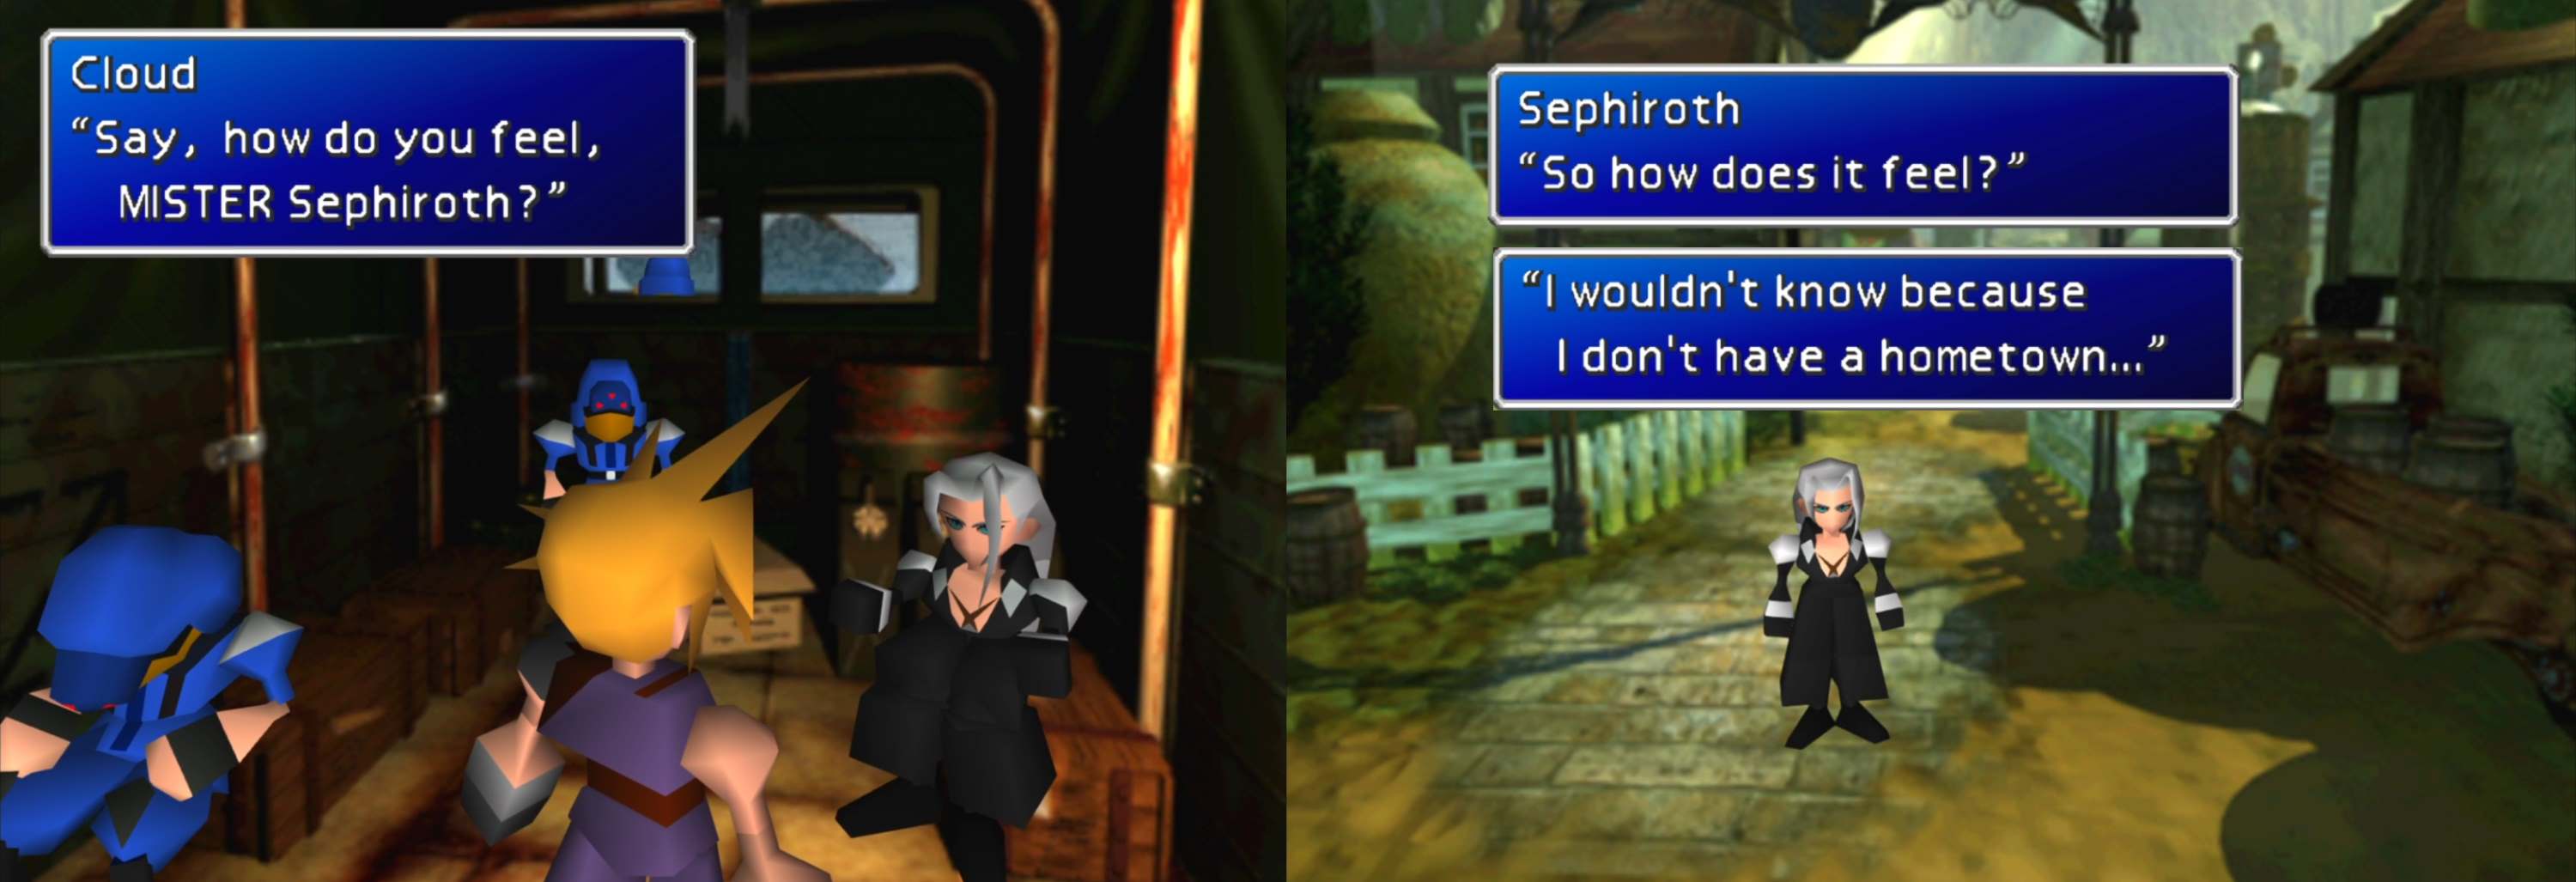 Cloud and Sephiroth ask each other about their feelings of identity